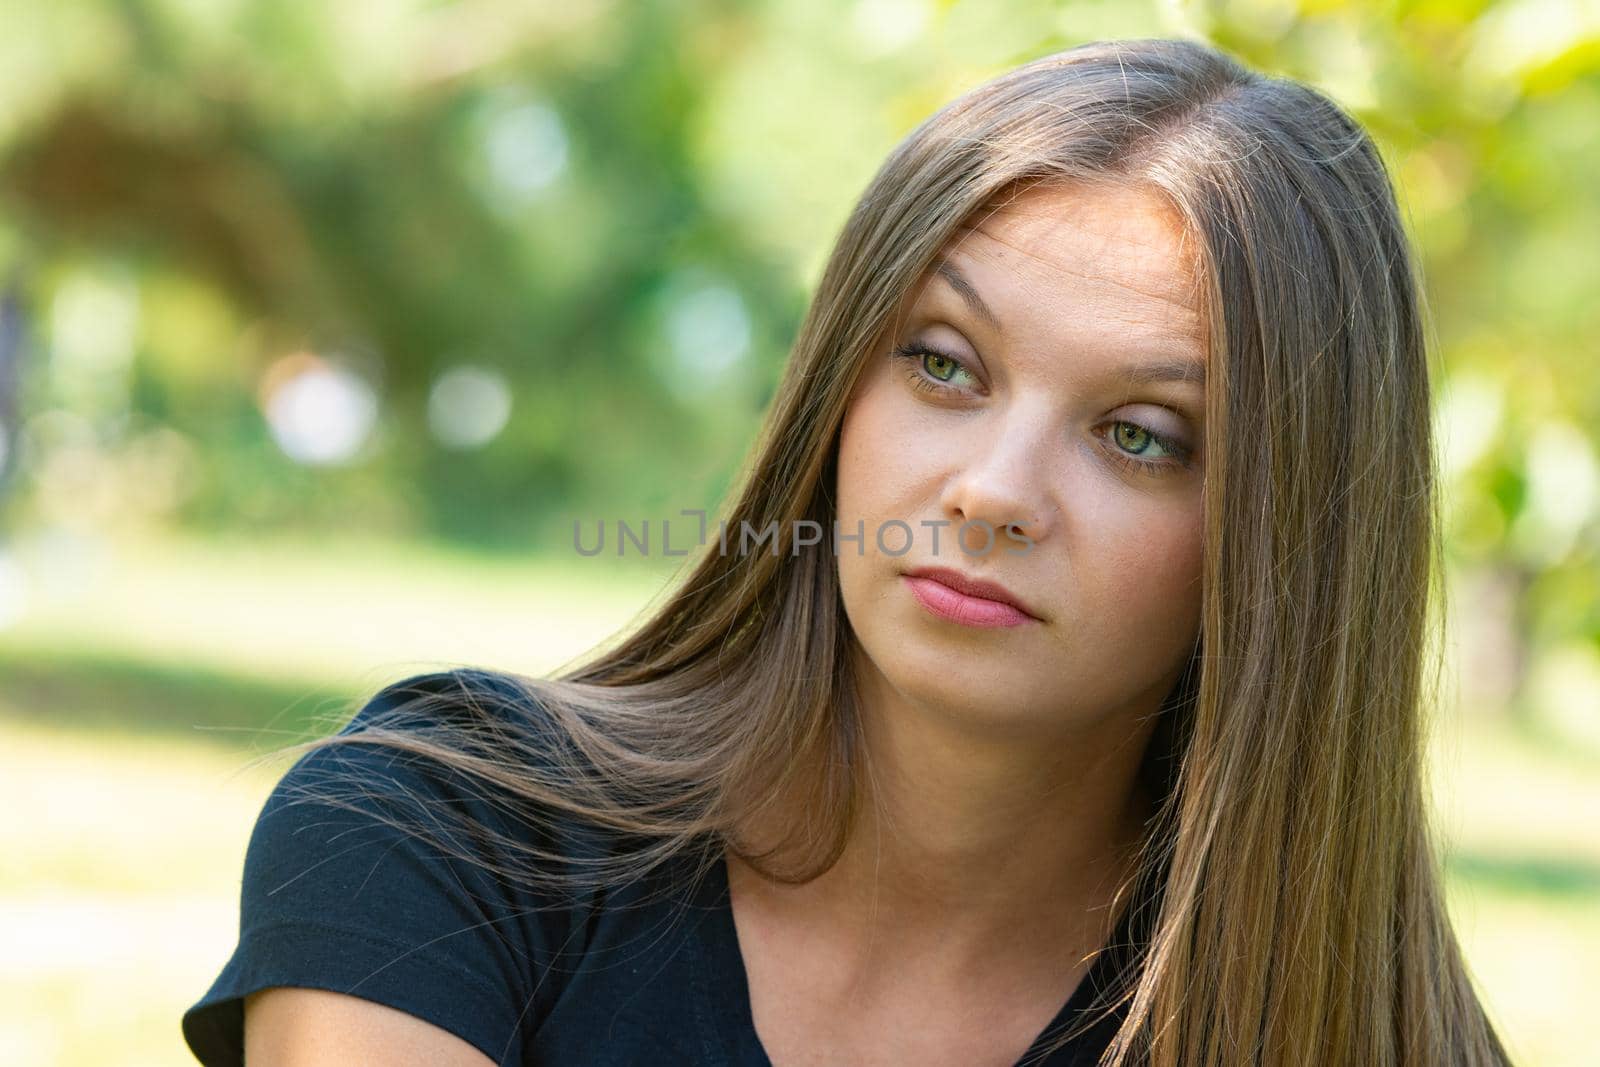 Surprised and perplexed look of a girl, close-up portrait